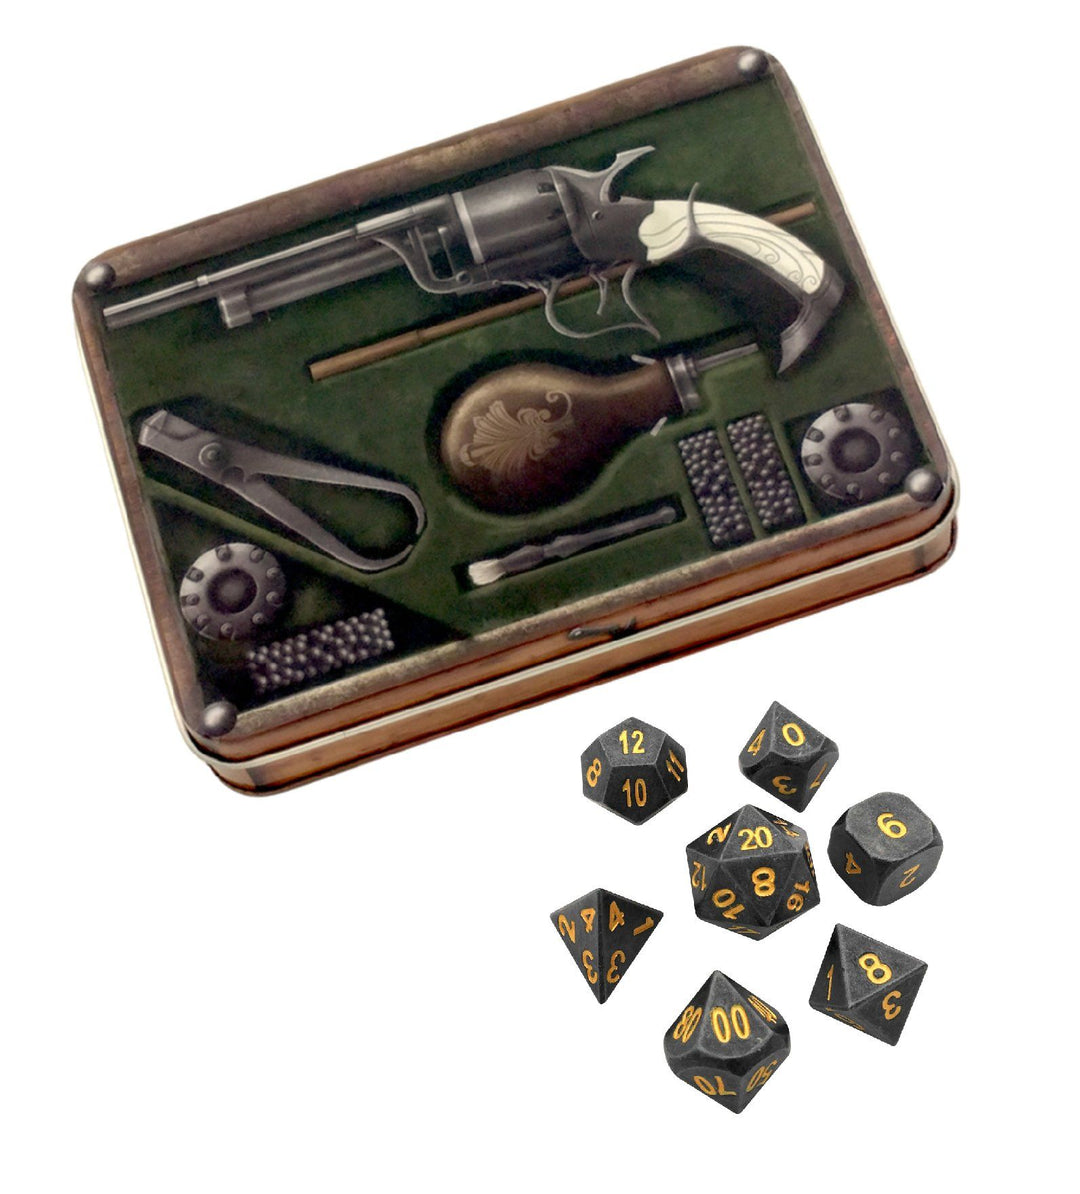 Metal Dice - Slinger's Kit With Hunger Of The Ancients |  Industrial Gray Color With Gold Numbering  Metal Dice